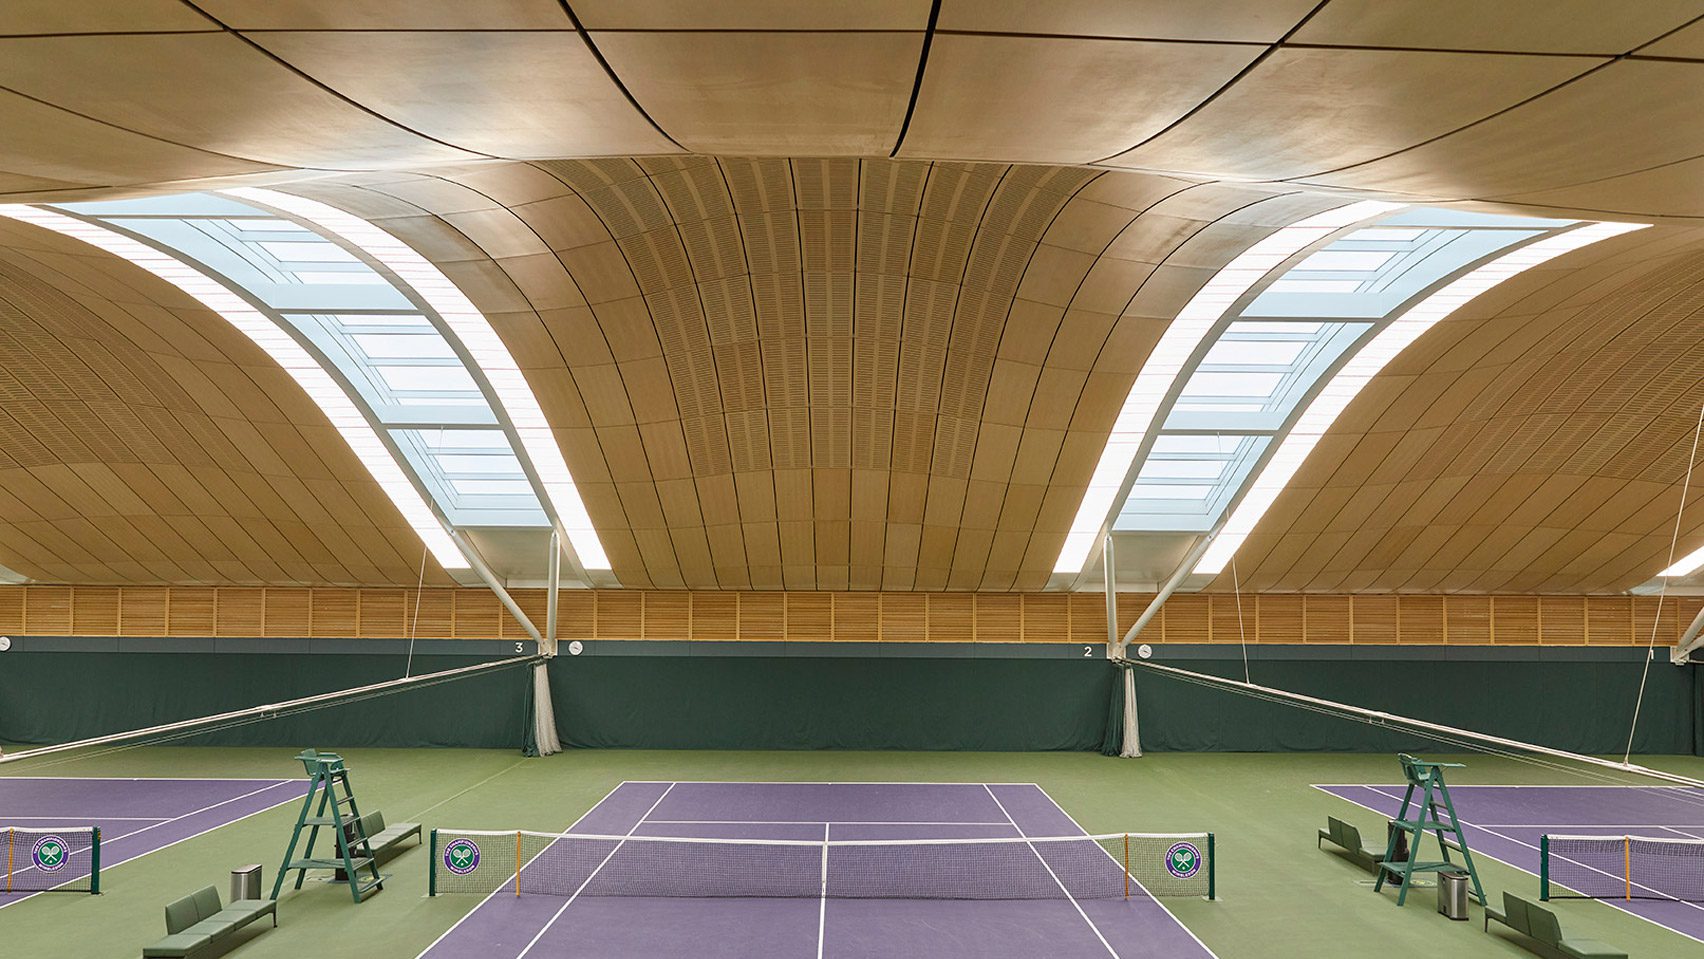 British Studio Hopkins Architects Unveils Stunning Indoor Tennis Centre With Undulating Timber-Coated Roof At Wimbledon